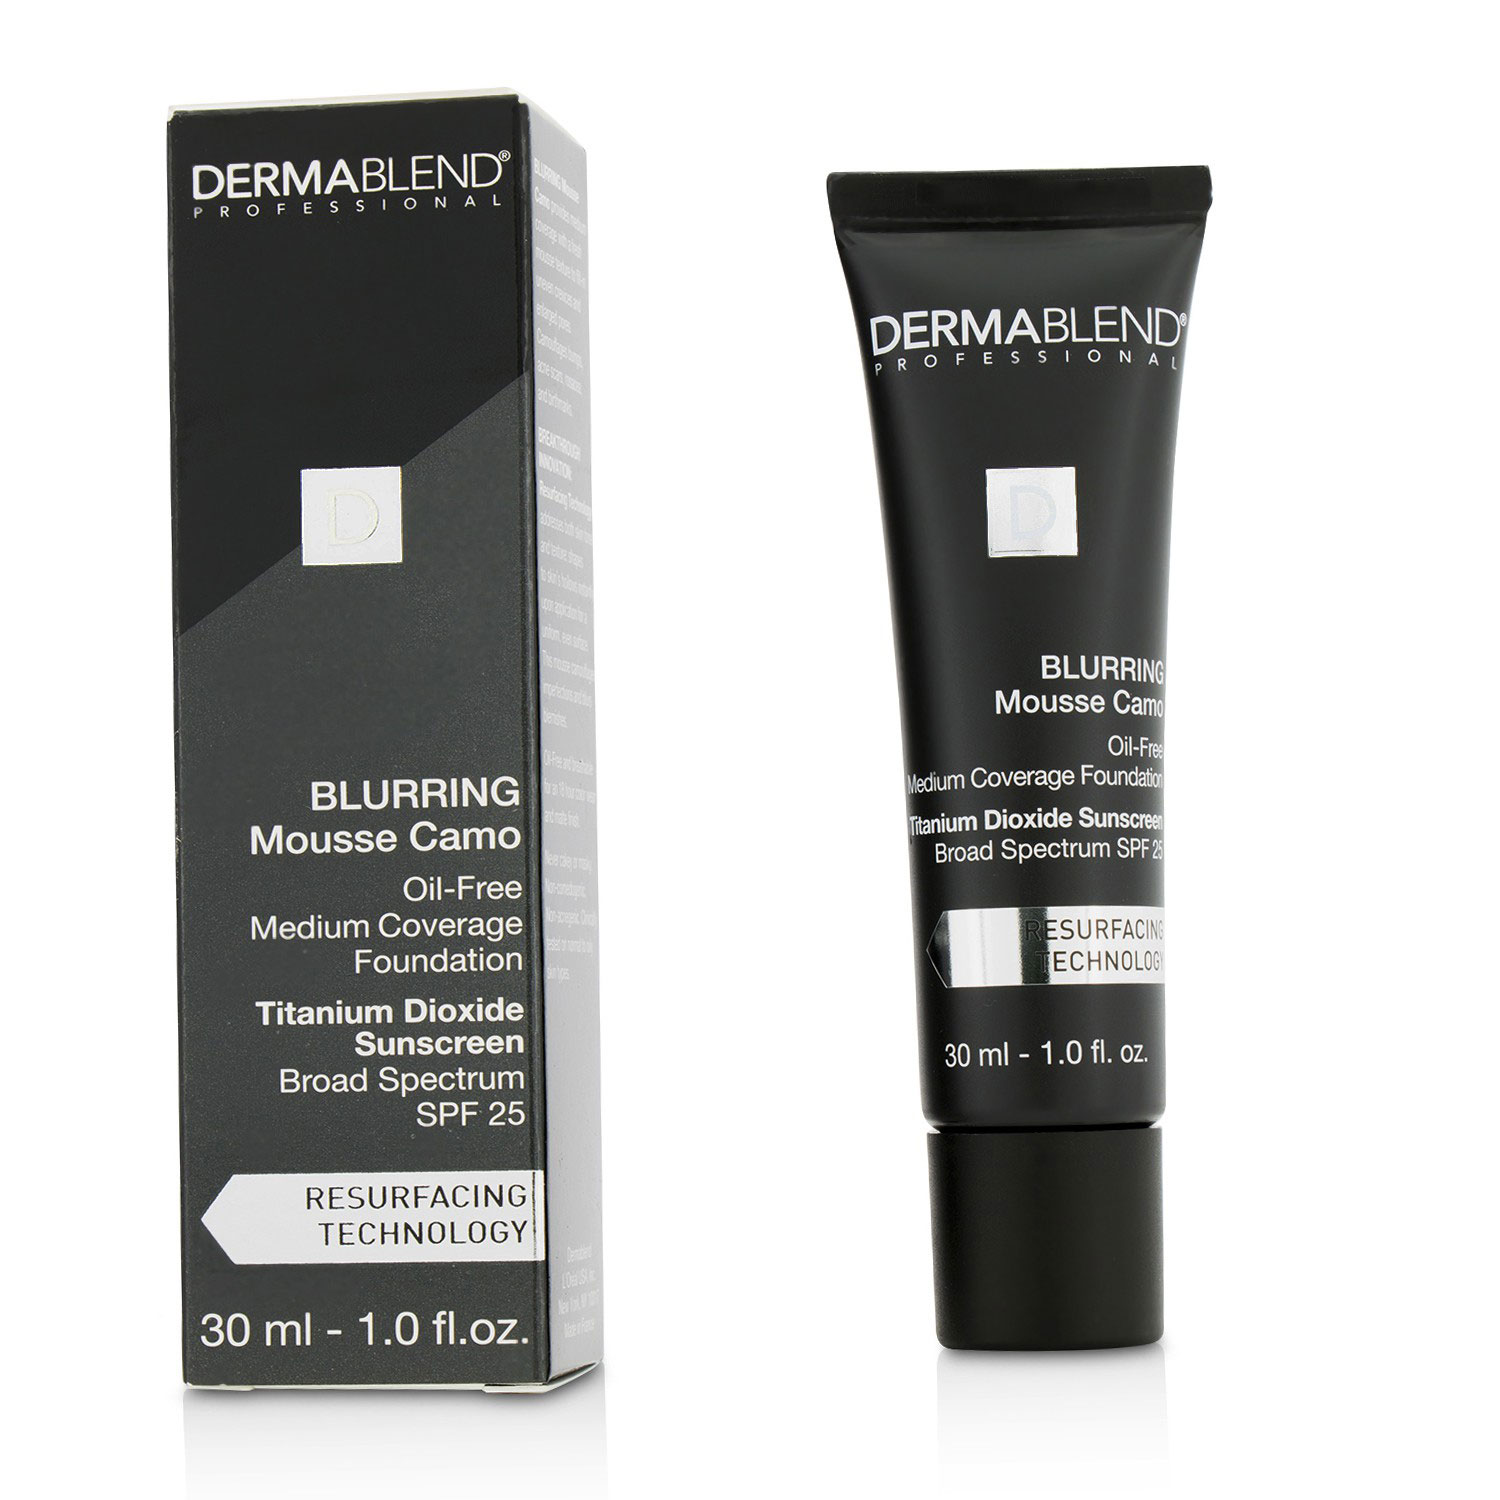 Blurring Mousee Camo Oil Free Foundation SPF 25 (Medium Coverage) - #40W Sahara Dermablend Image